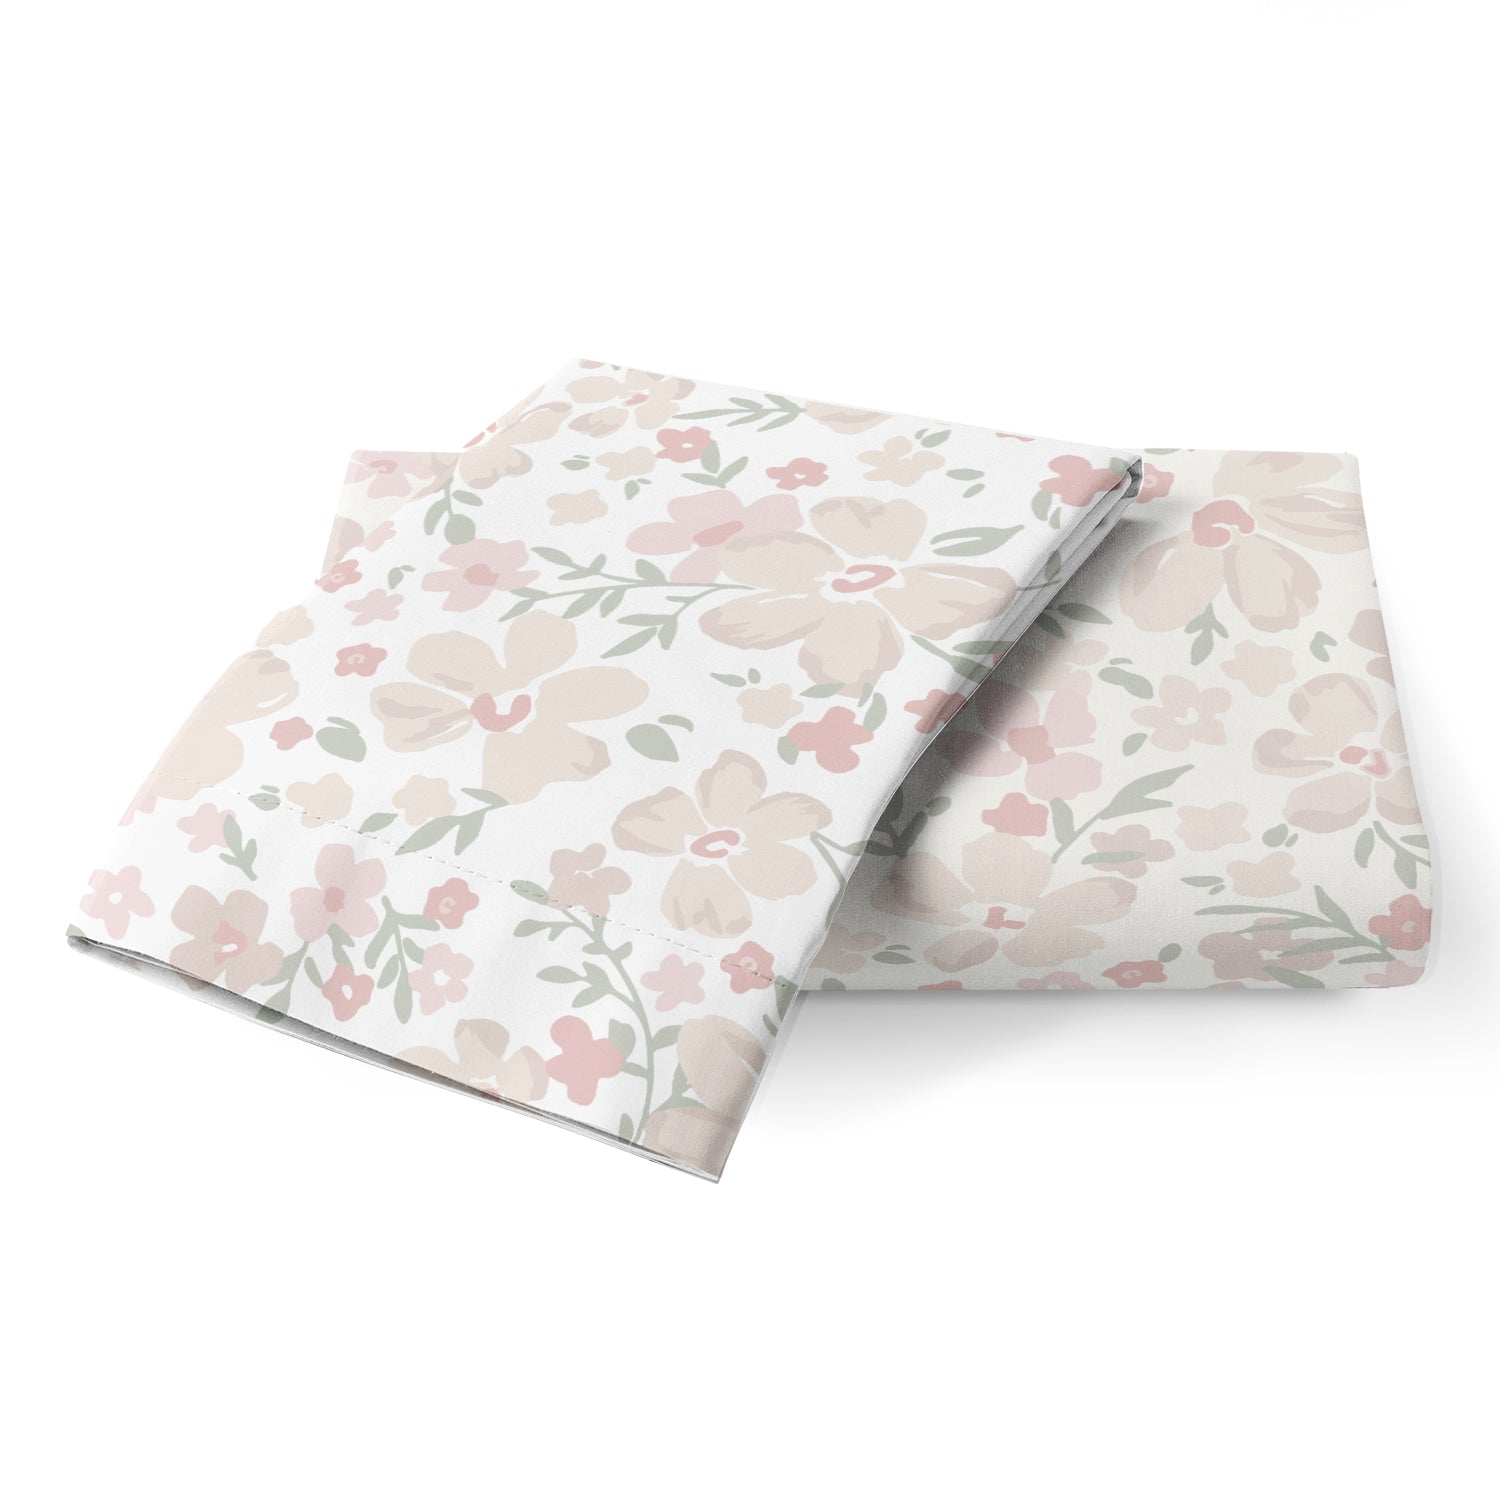 A pair of folded Blossom Organic Cotton Toddler Pillowcases with a pink and green flower pattern on a white background by Makemake Organics.